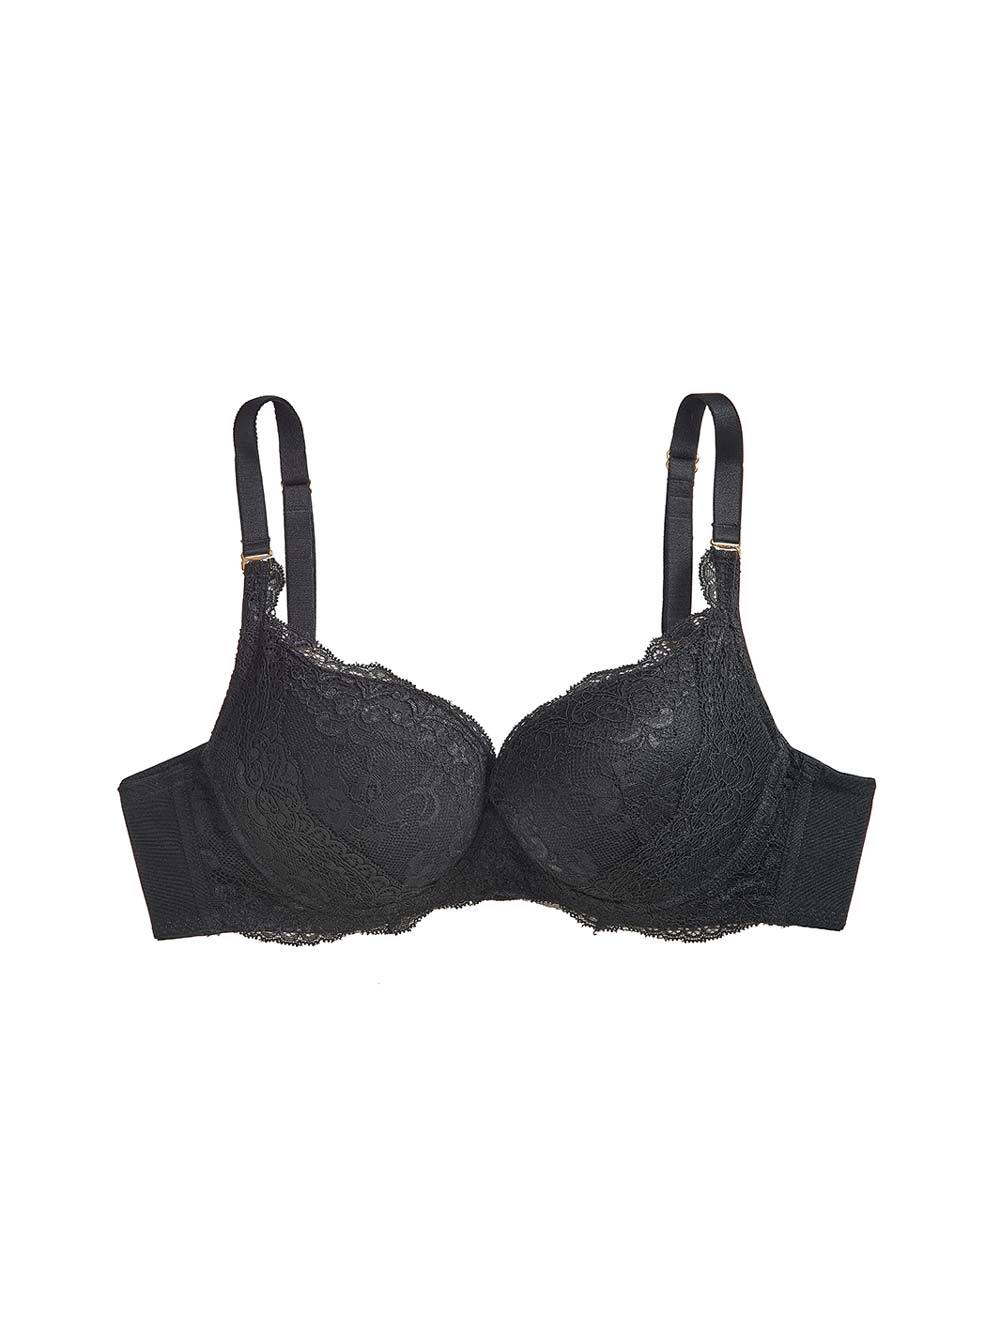 Rell Push-Up Bra, Petites, Extra Wide Band, Removable Push-Up Pads